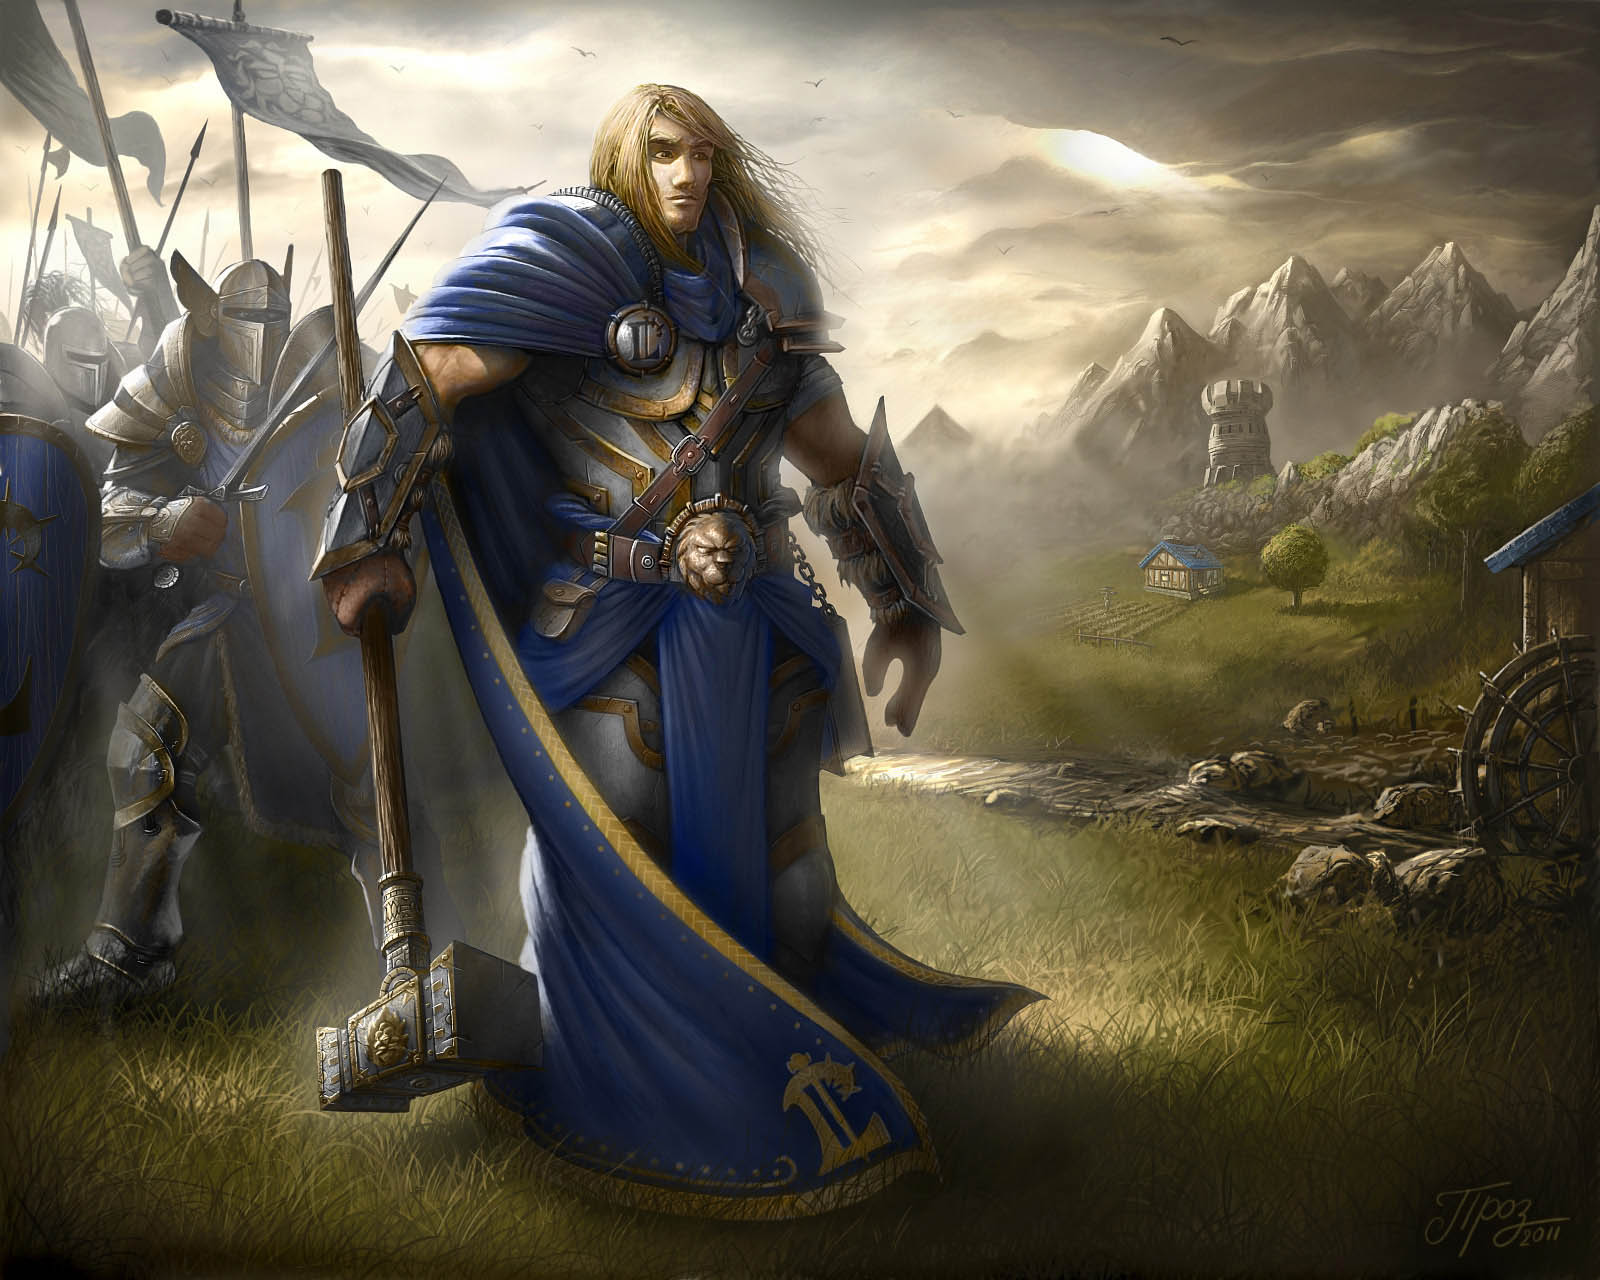 1080p Warcraft Iii: Reign Of Chaos Hd Images